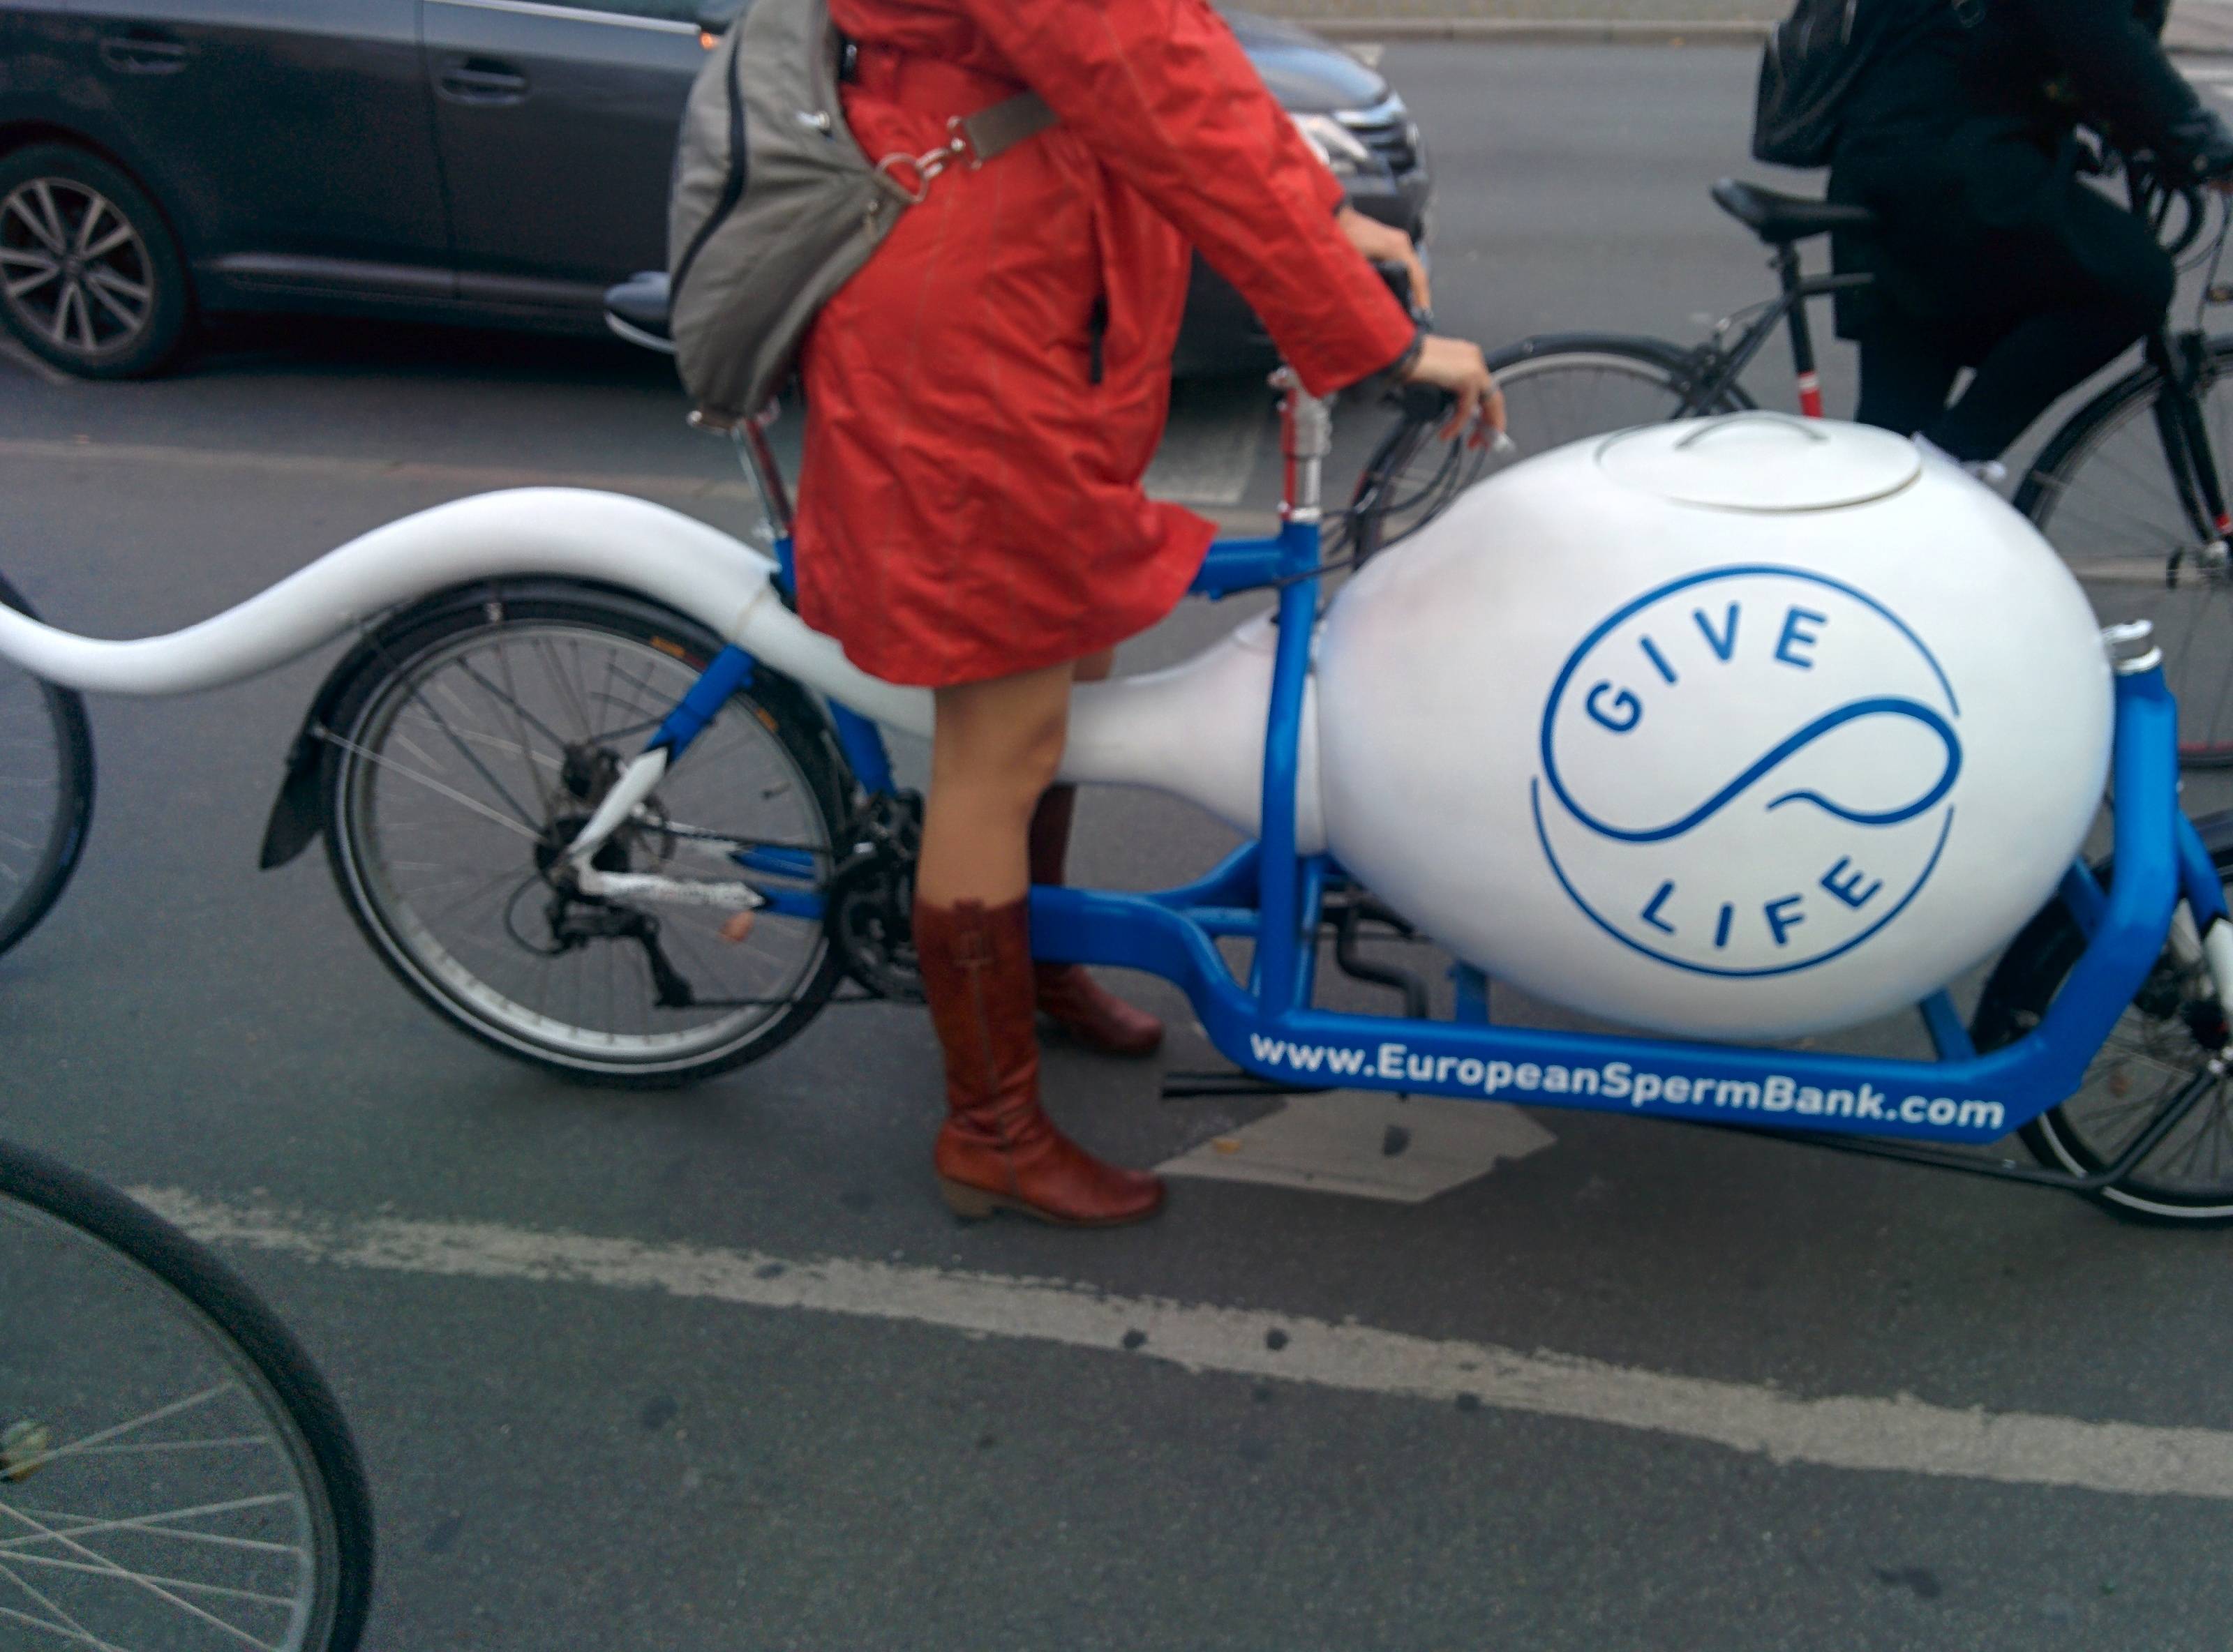 Danish sperm bank has a sperm bike fitted with a cryo tank.